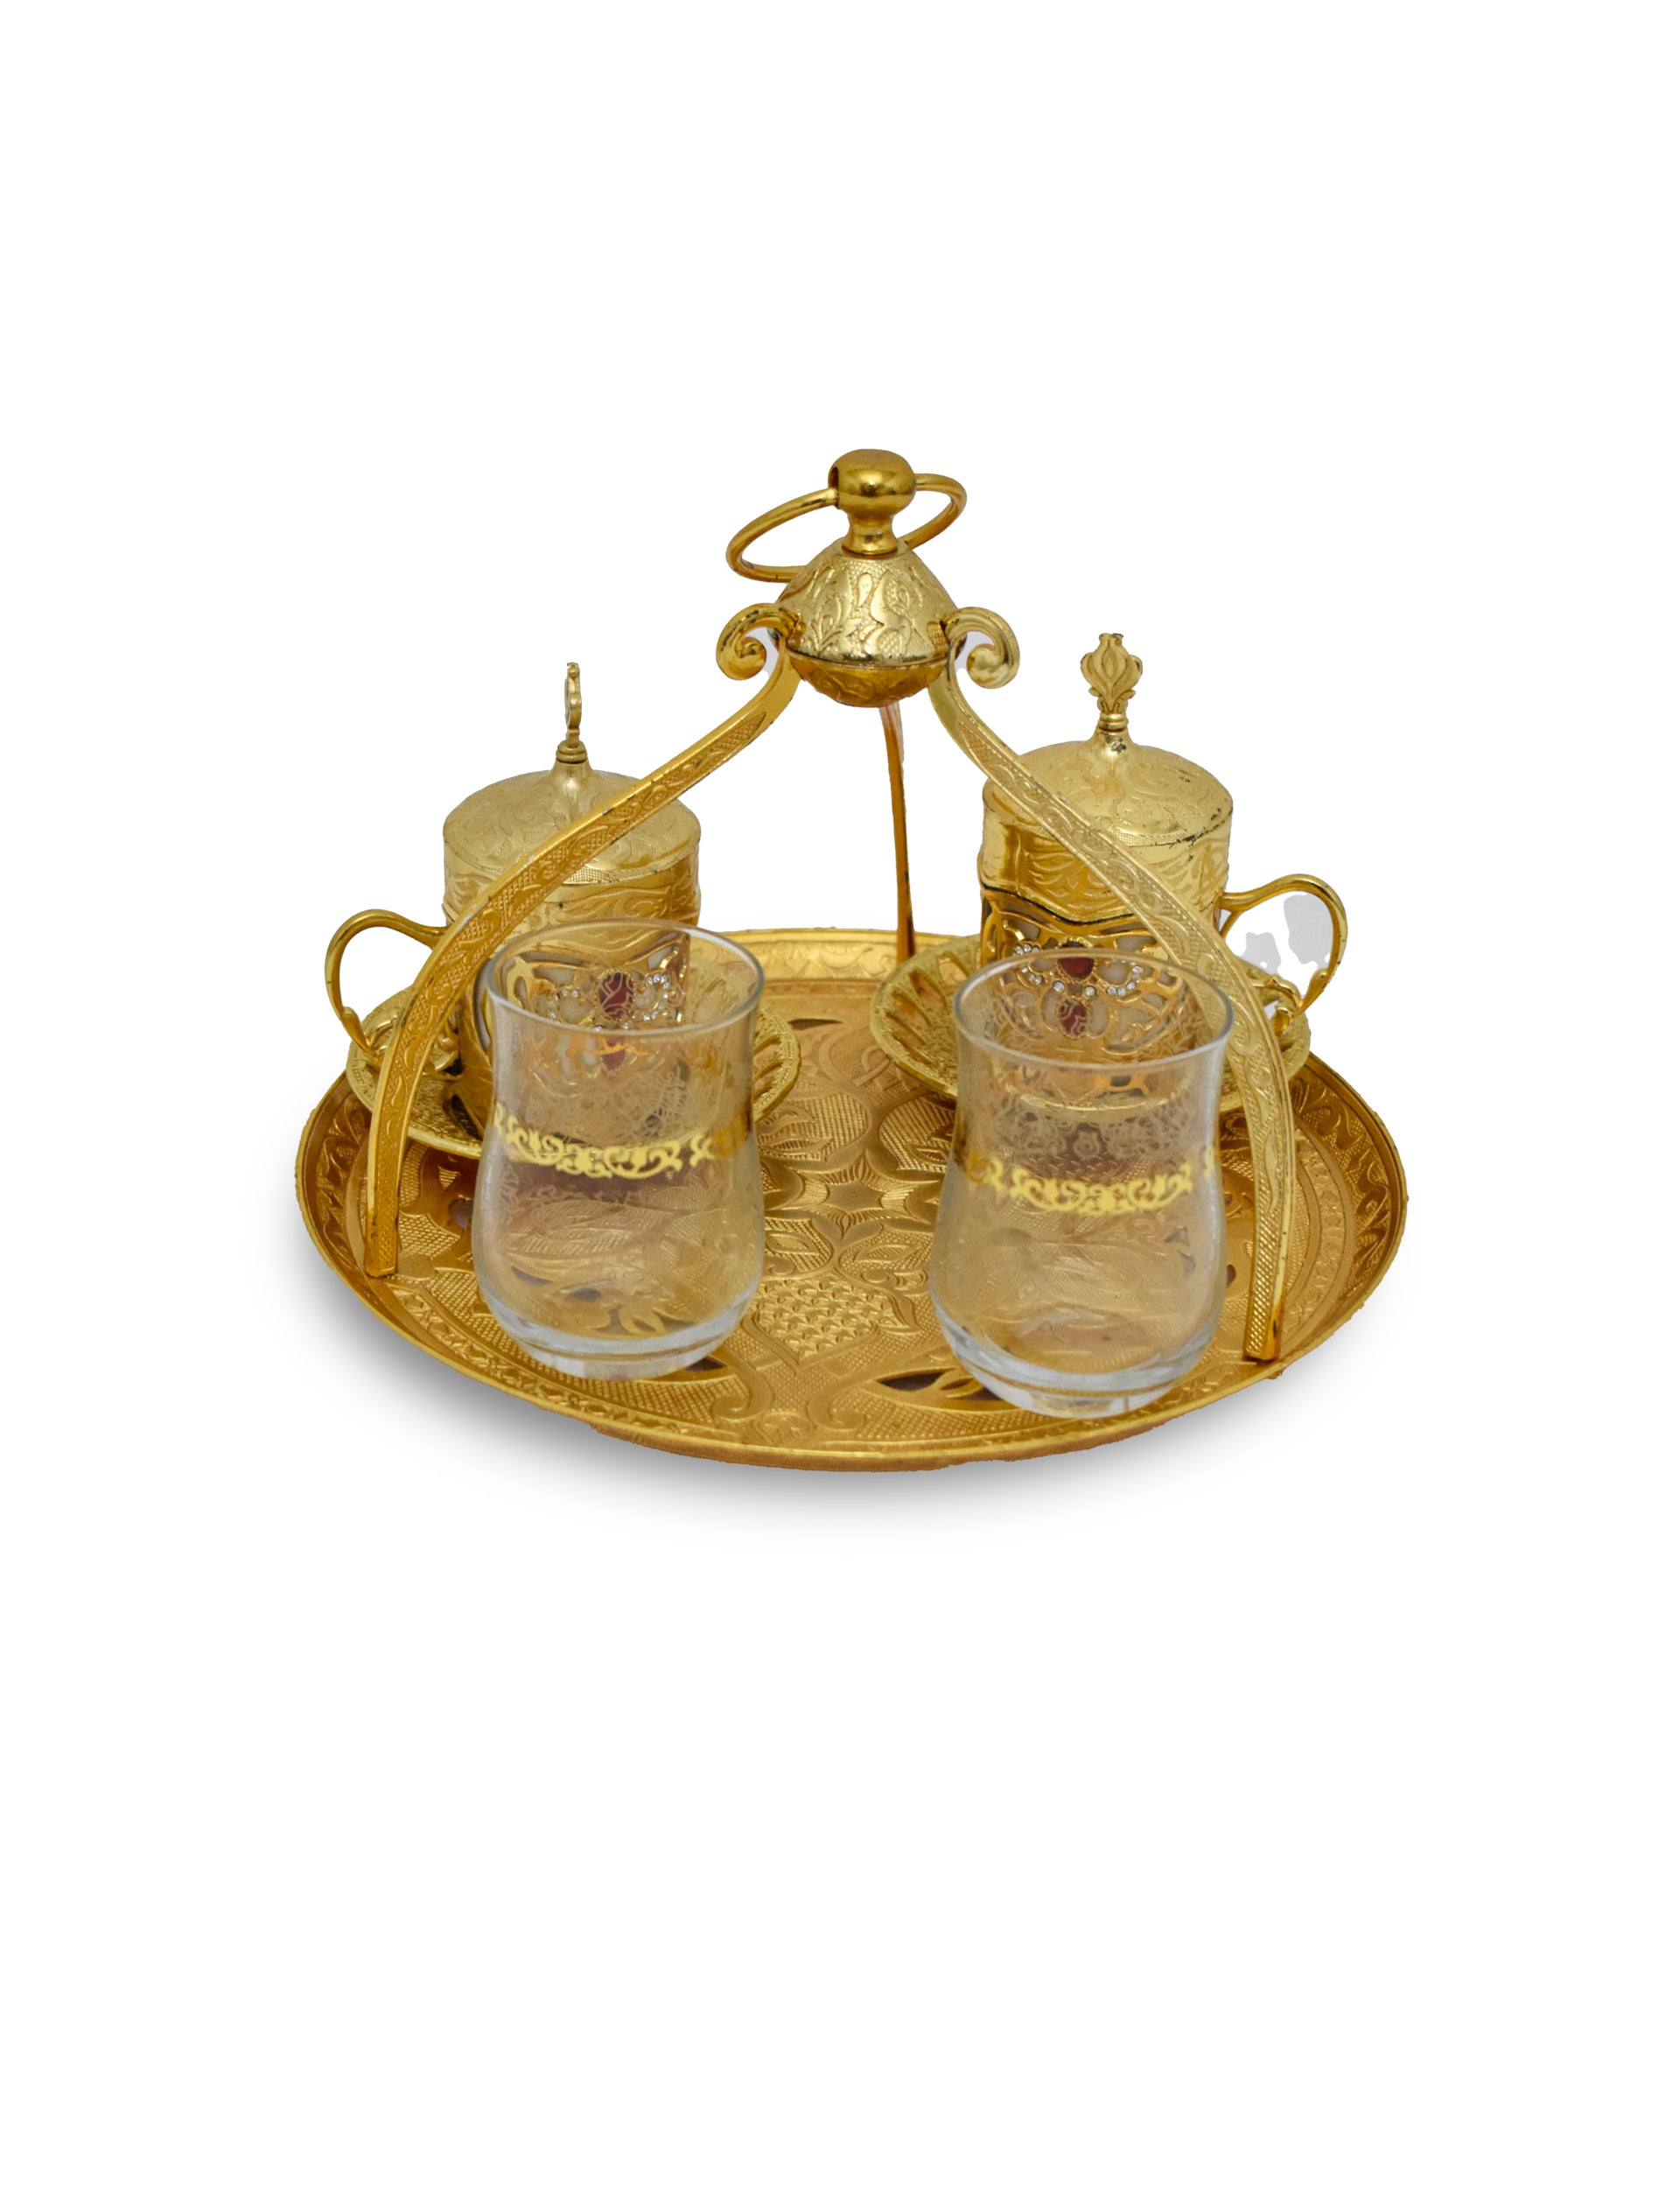 Angled front view of gold-plated 5-piece Turkish Coffee Set with pair of glasses, cup & saucer and a serving tray